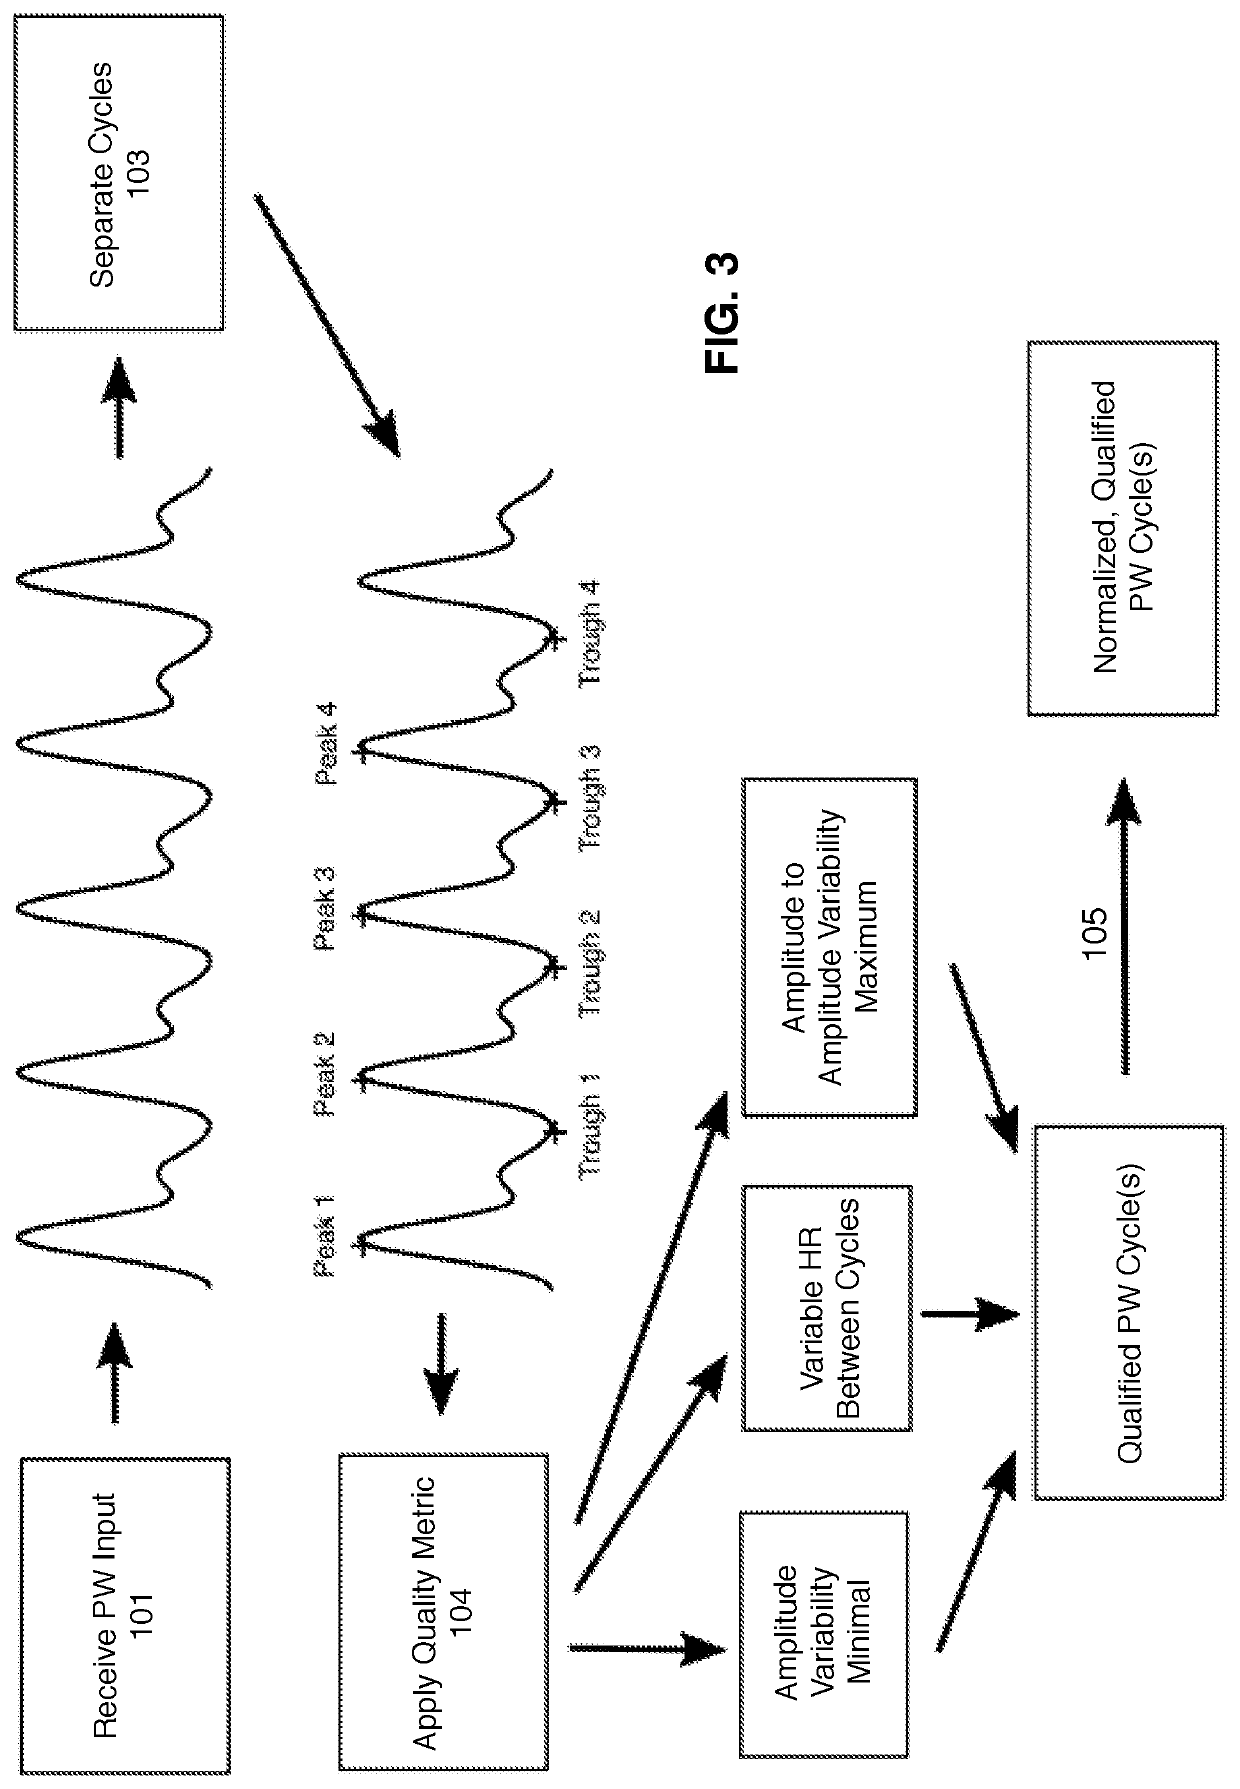 Apparatus, Systems, and Methods for Noninvasive Measurement of Cardiovascular Parameters